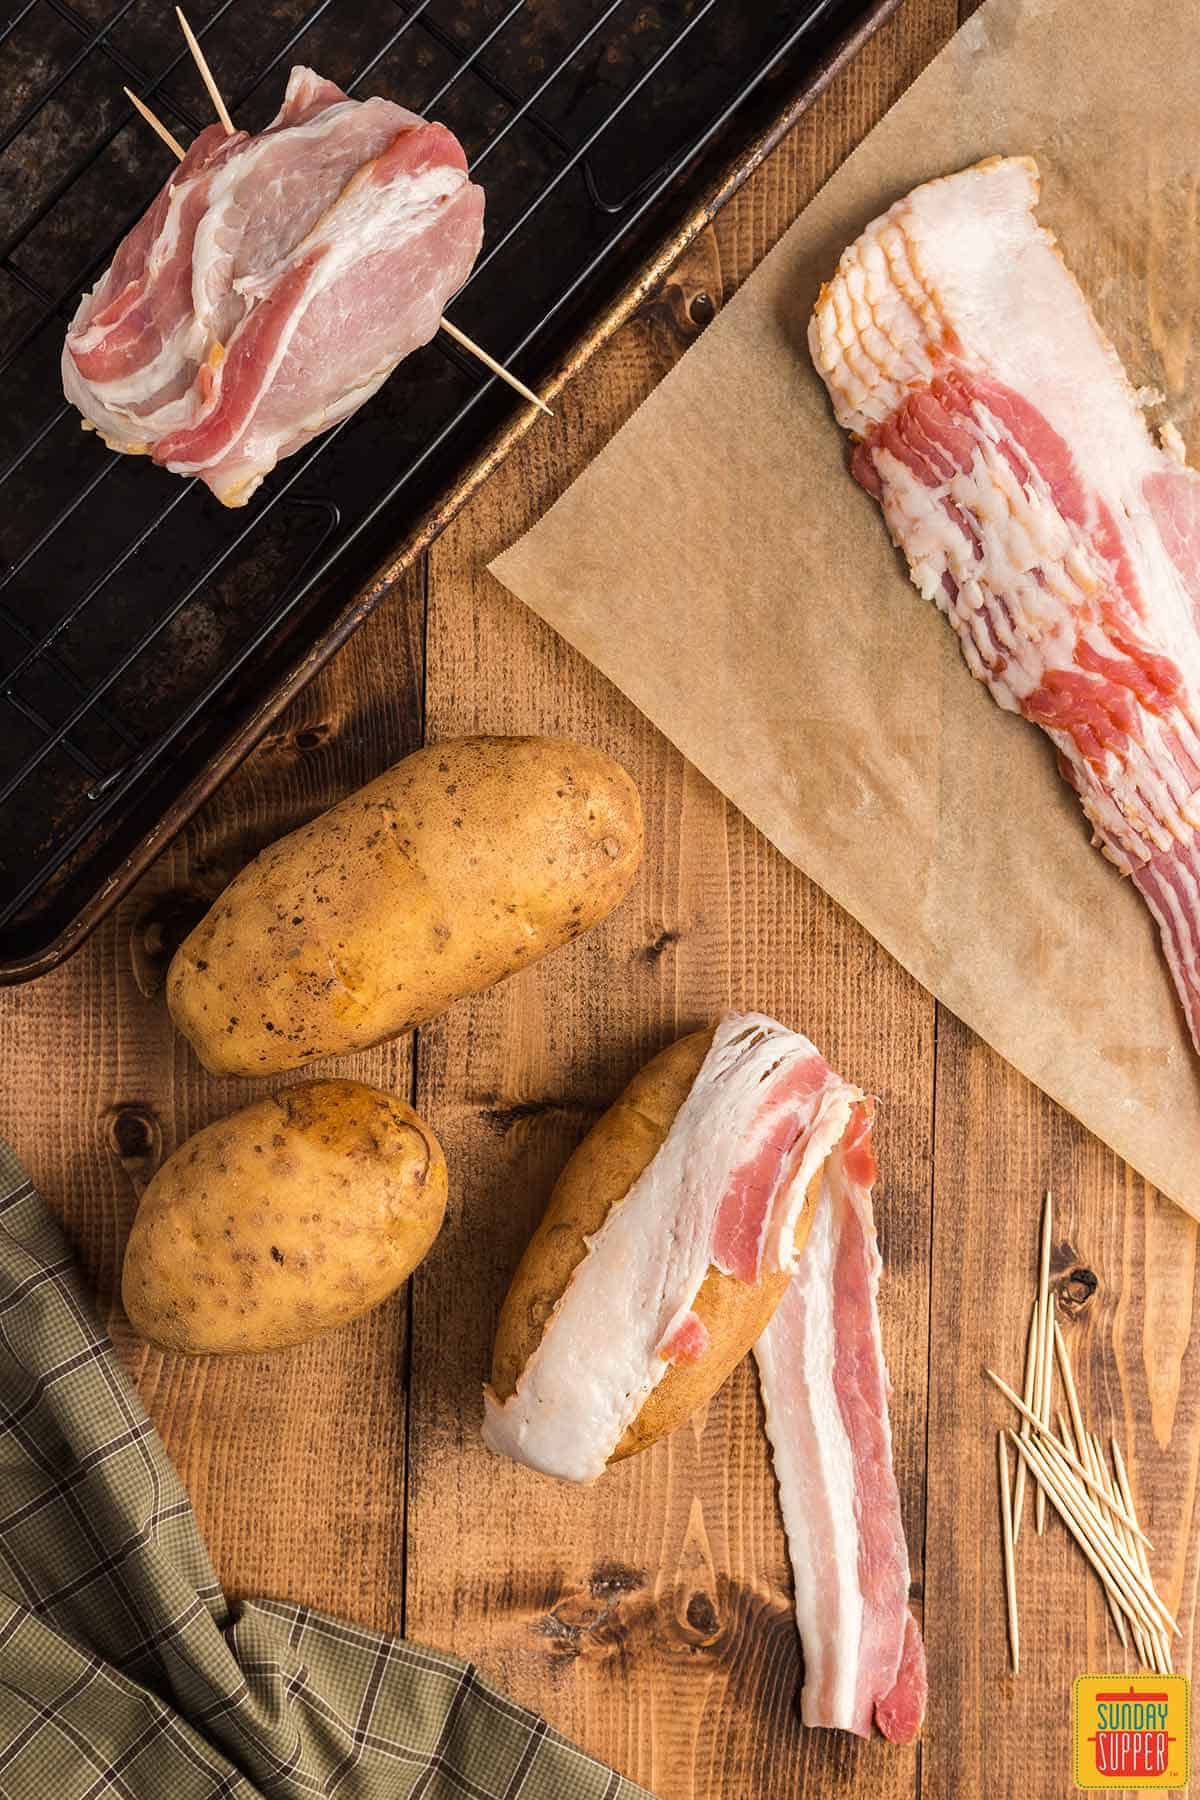 Wrapping a russet potato with bacon slices